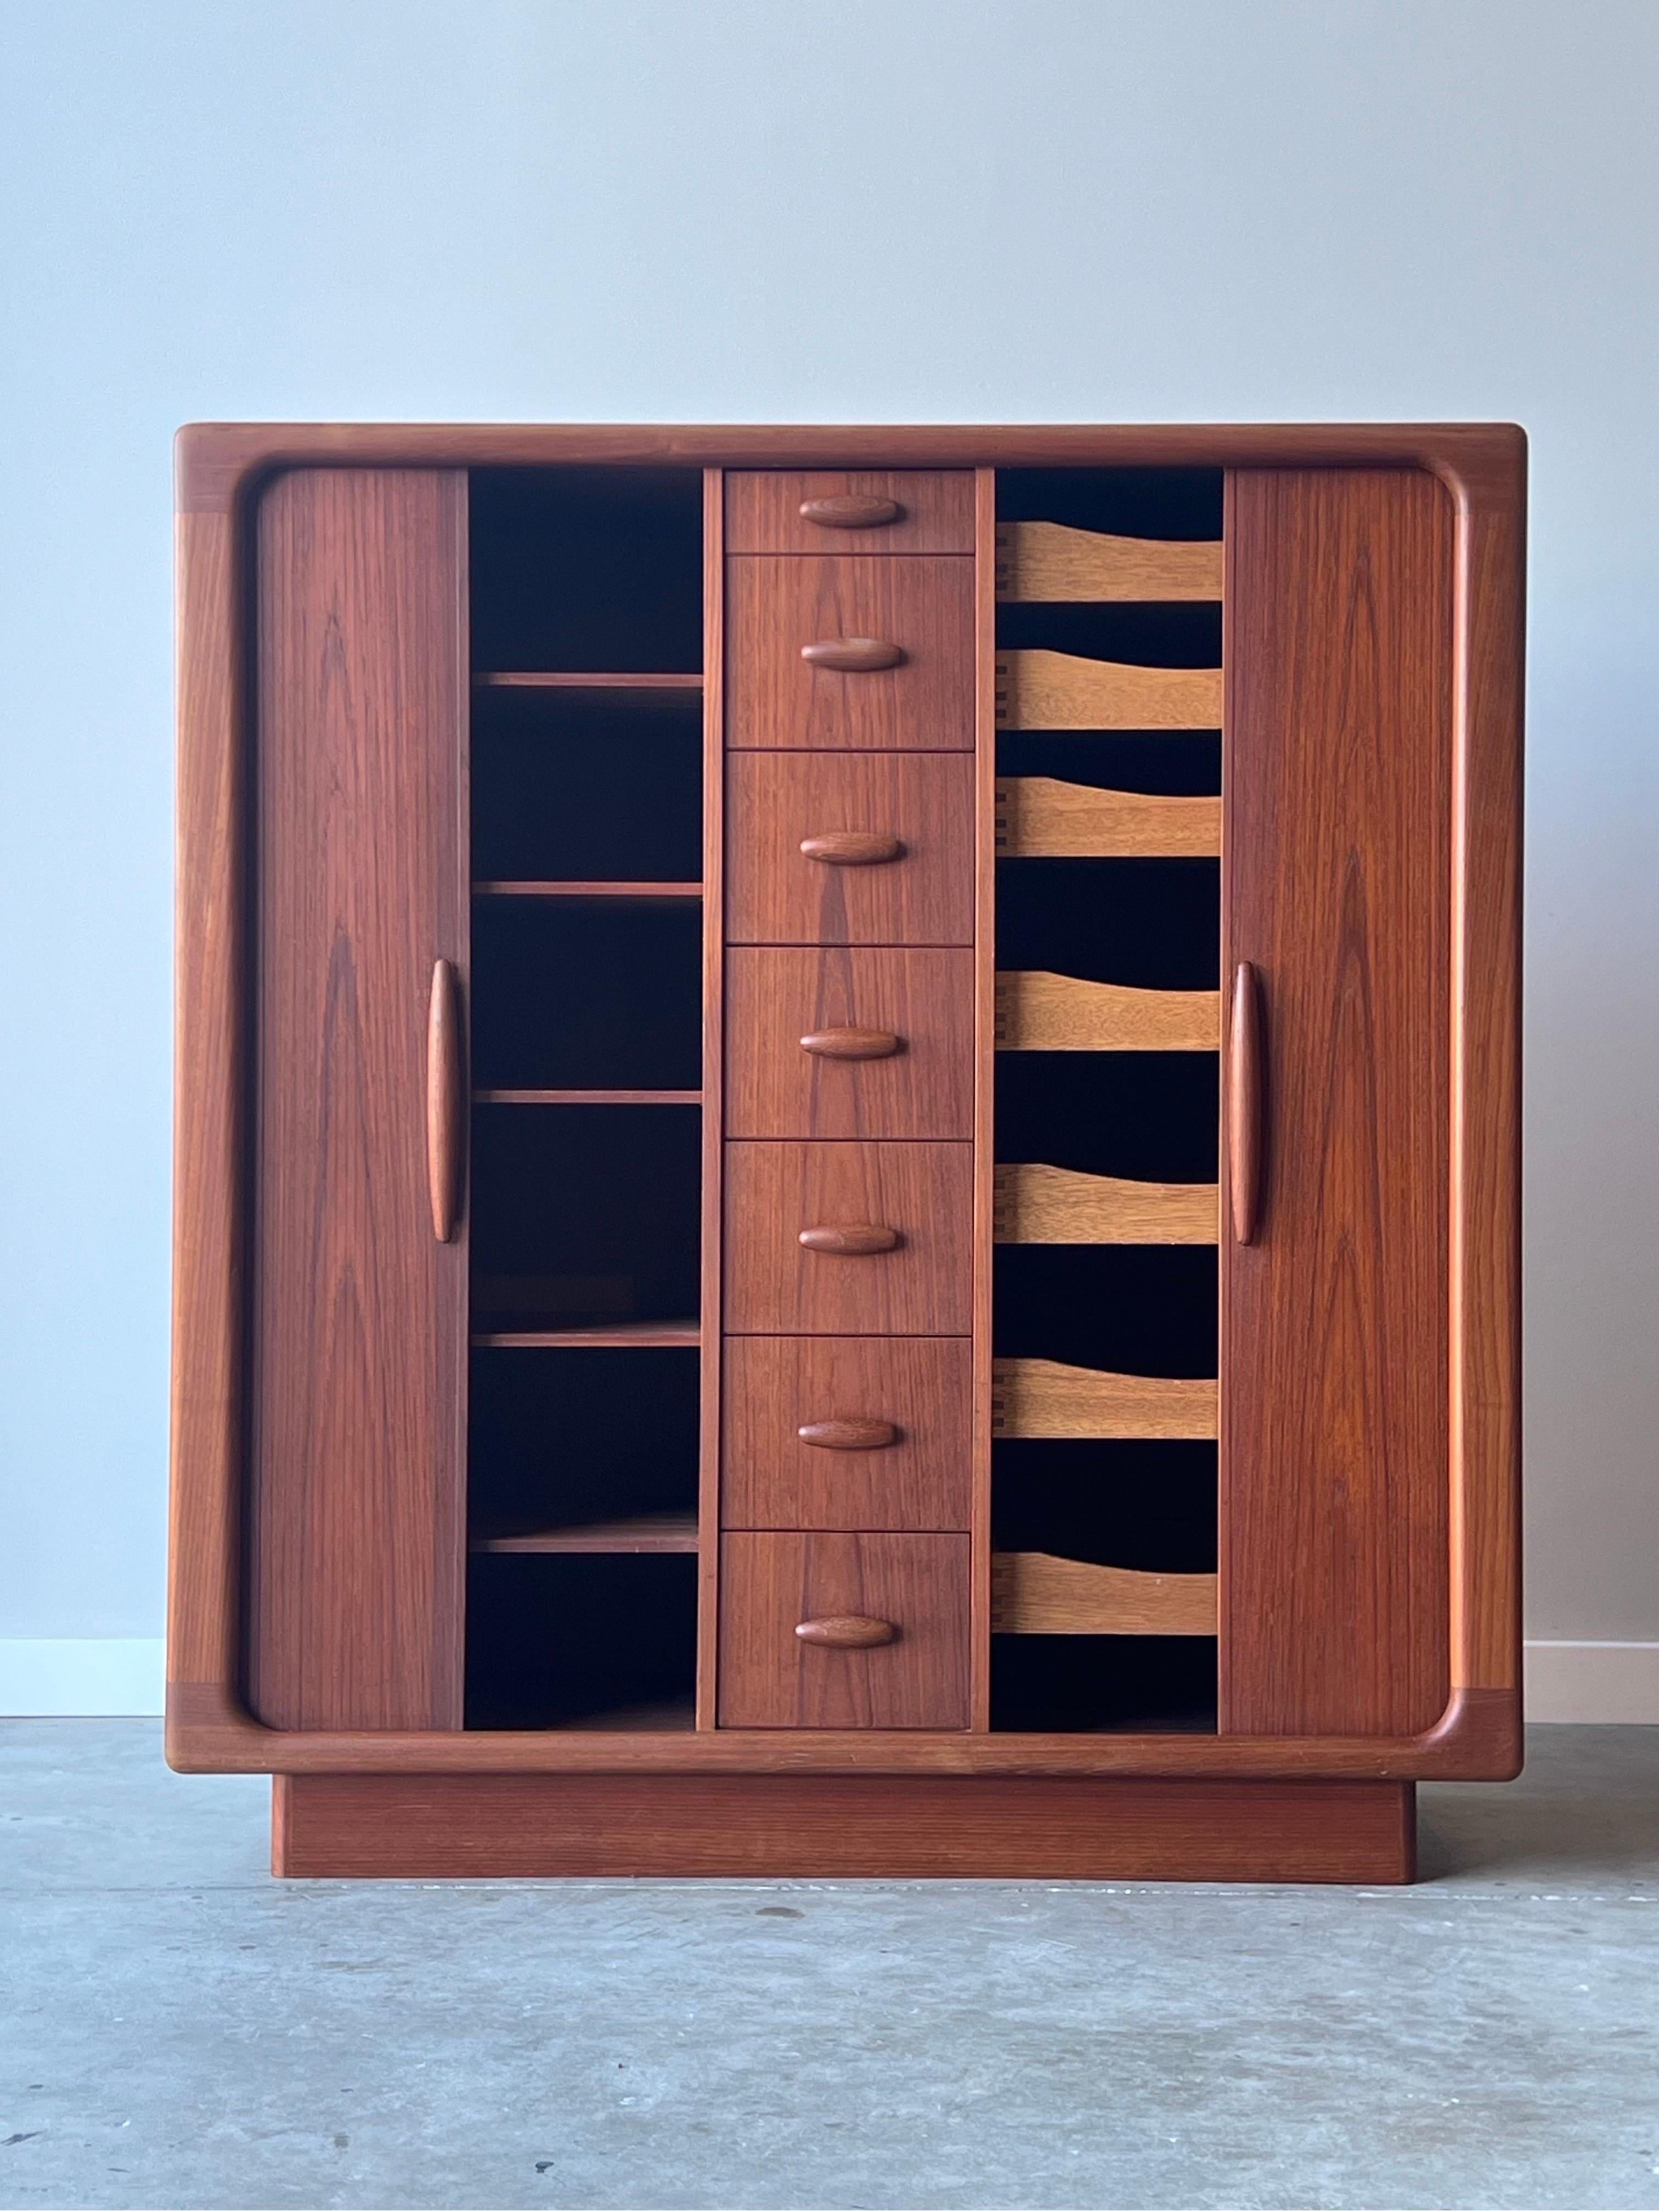 Massive mid-century highboy / armoire by Dyrlund, Denmark. This tall dresser is made from beautifully sculpted teak wood, circa 1970s. Two tambour doors on both the left and right side of the dresser. The middle section is home to seven smooth